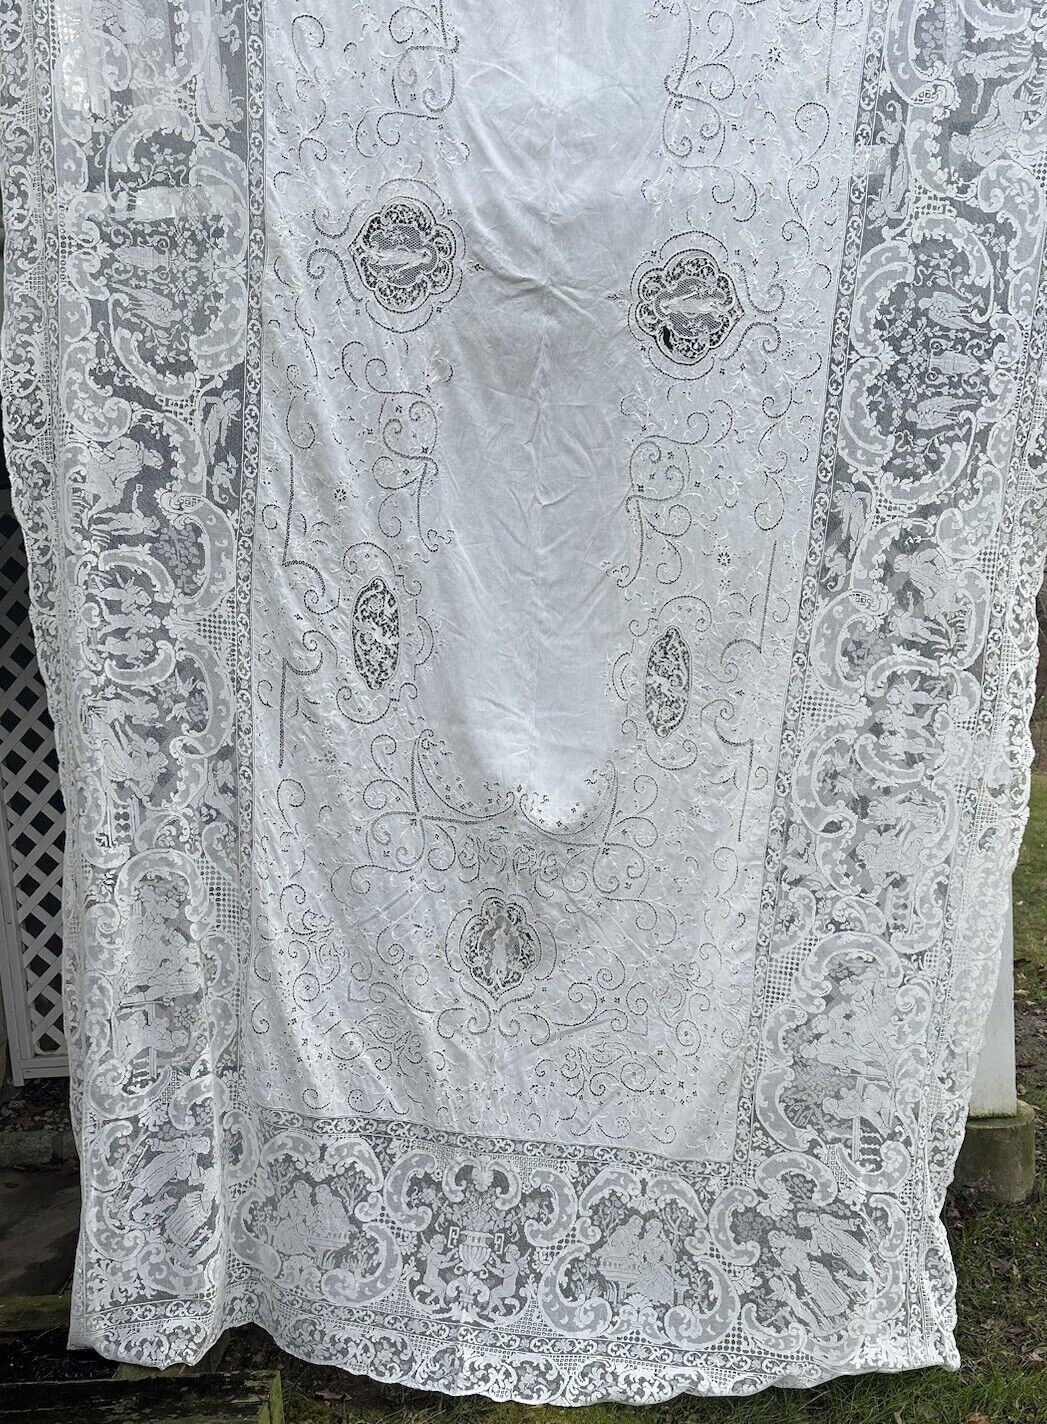 Antique  Lace Huge Handmade Tablecloth Italy France Elaborate Banquet 98 X 194”